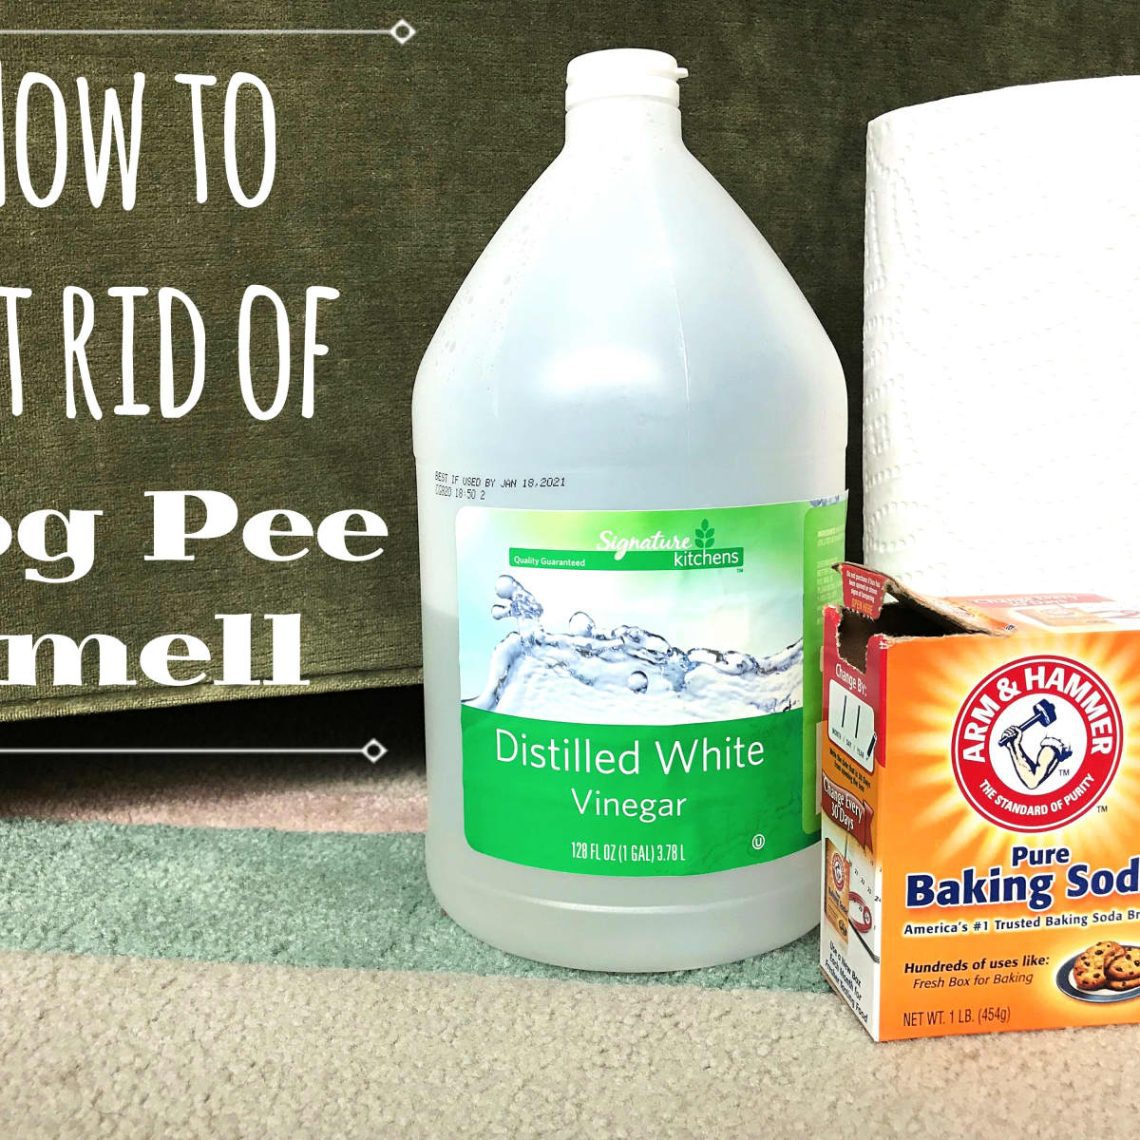 How to get rid of the smell of dog urine?